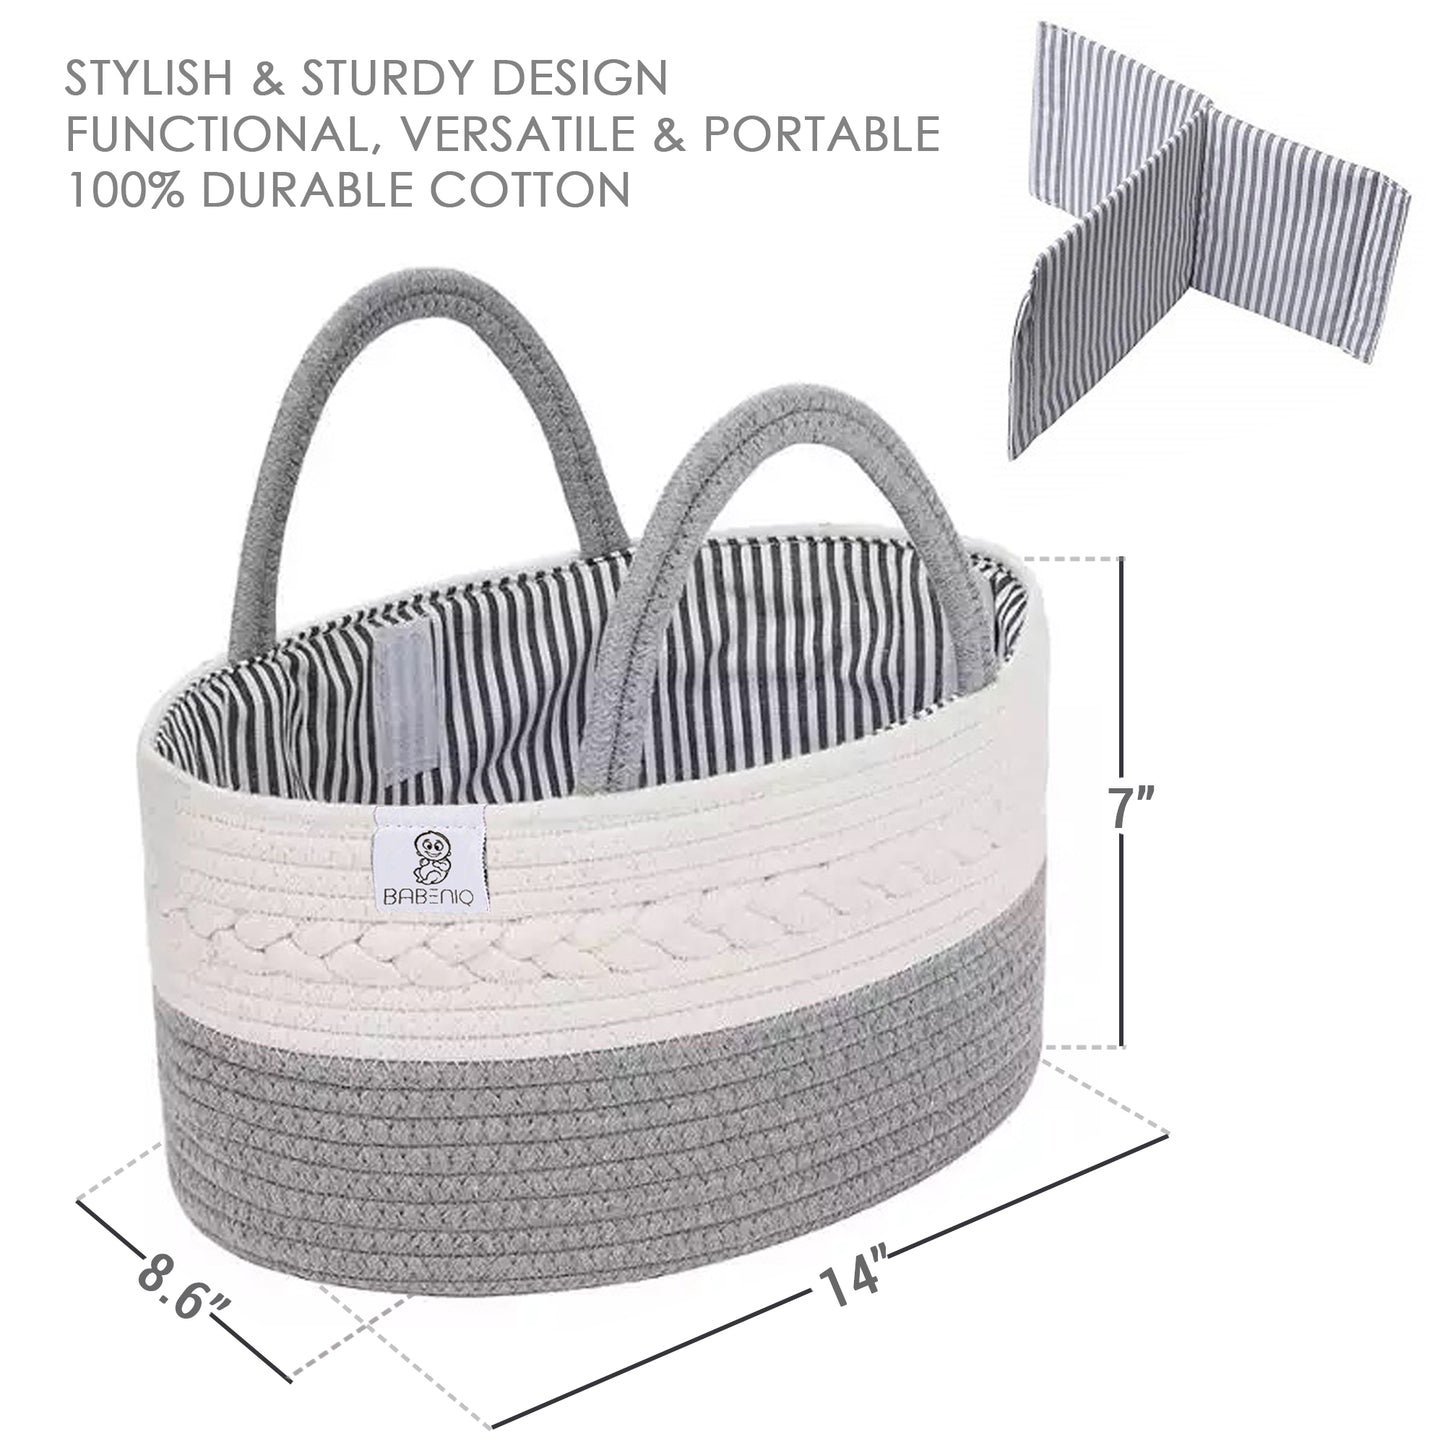 babeniq diaper caddy with lid in south africa,